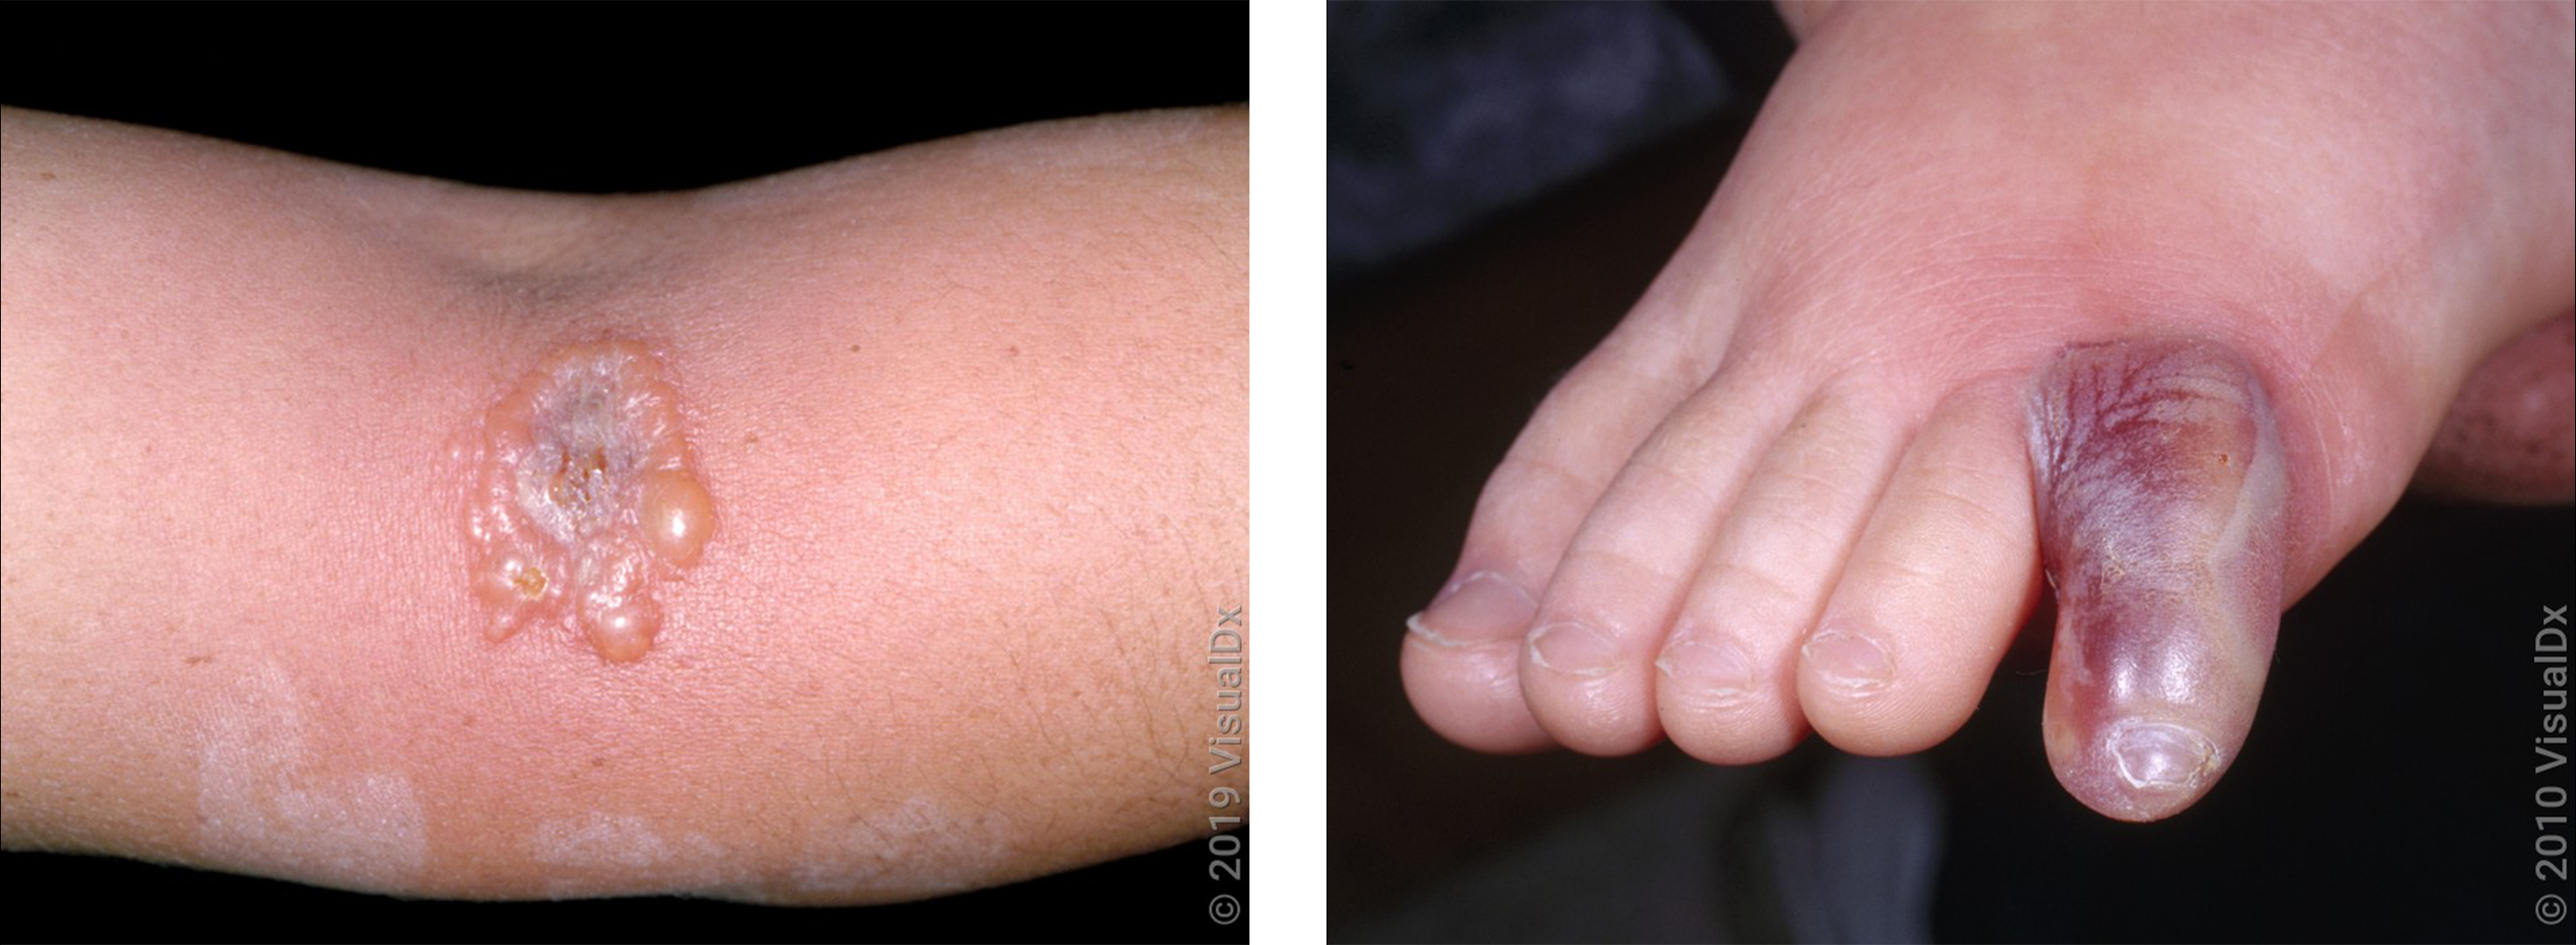 Left: An arm with a red rash that has blisters and some swelling. Right: Close-up of a toe covered in a bloody blister.